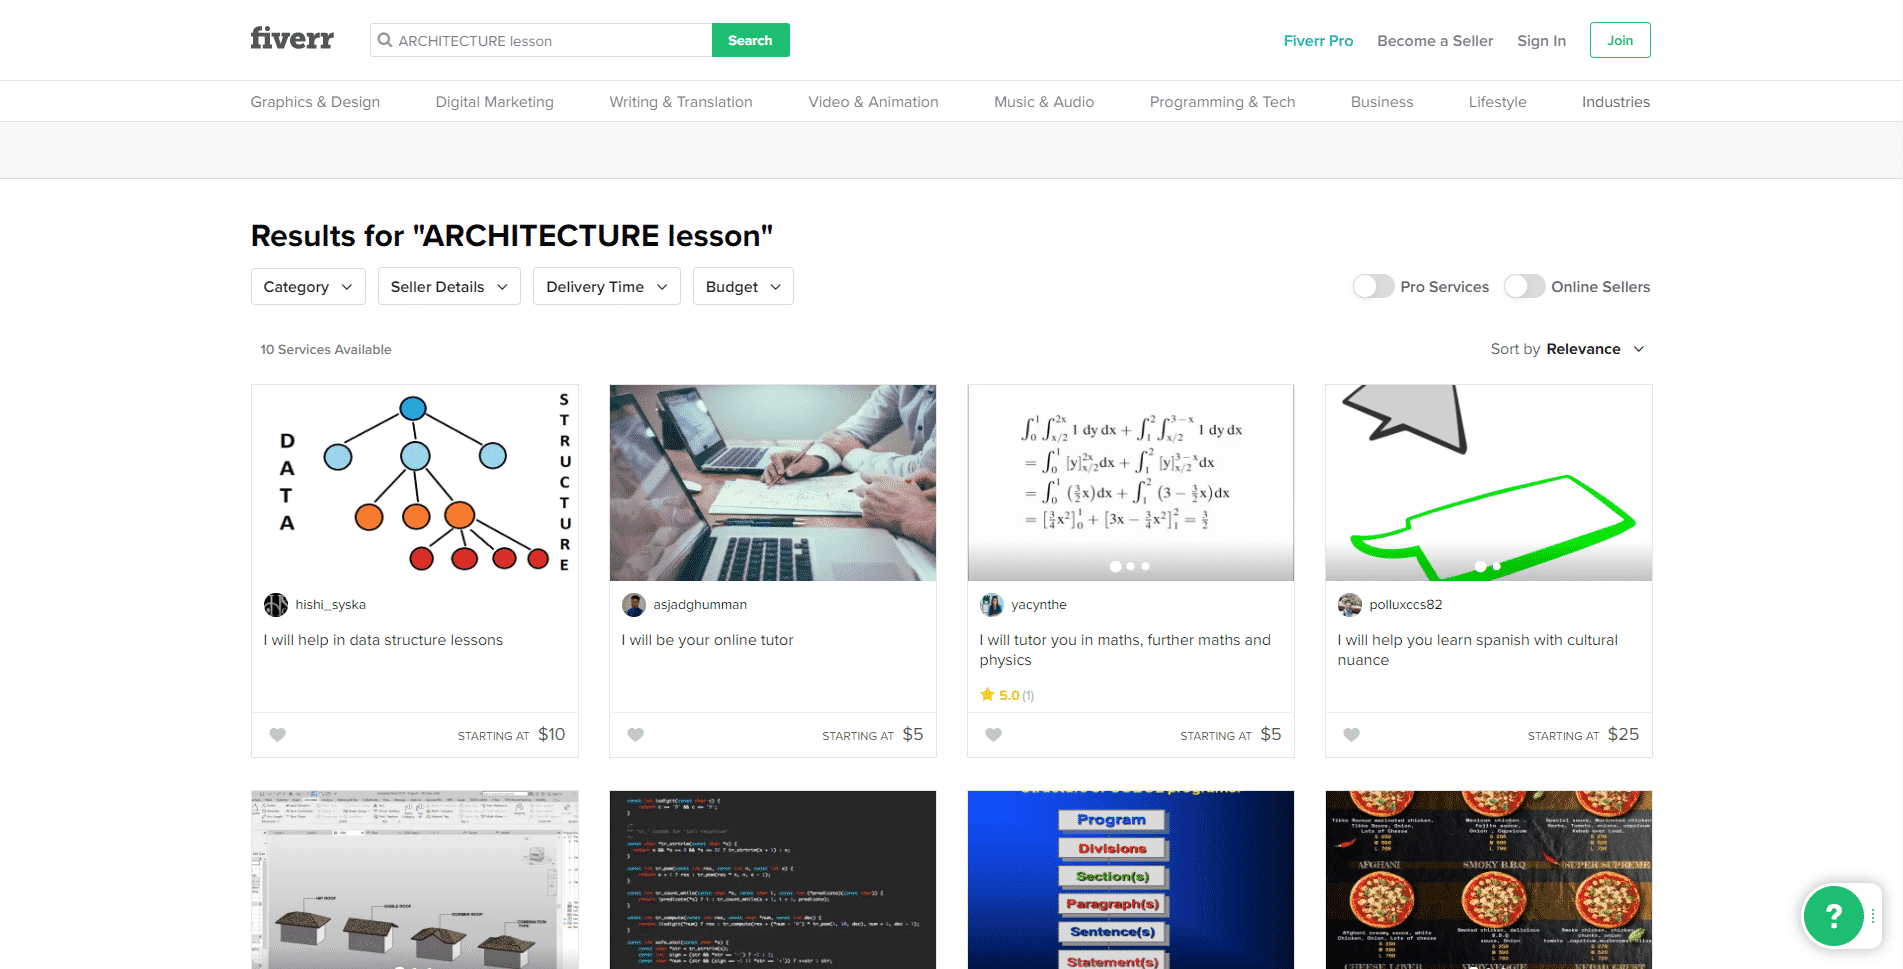 Fiverr Learn Design and Architecture Lessons Online